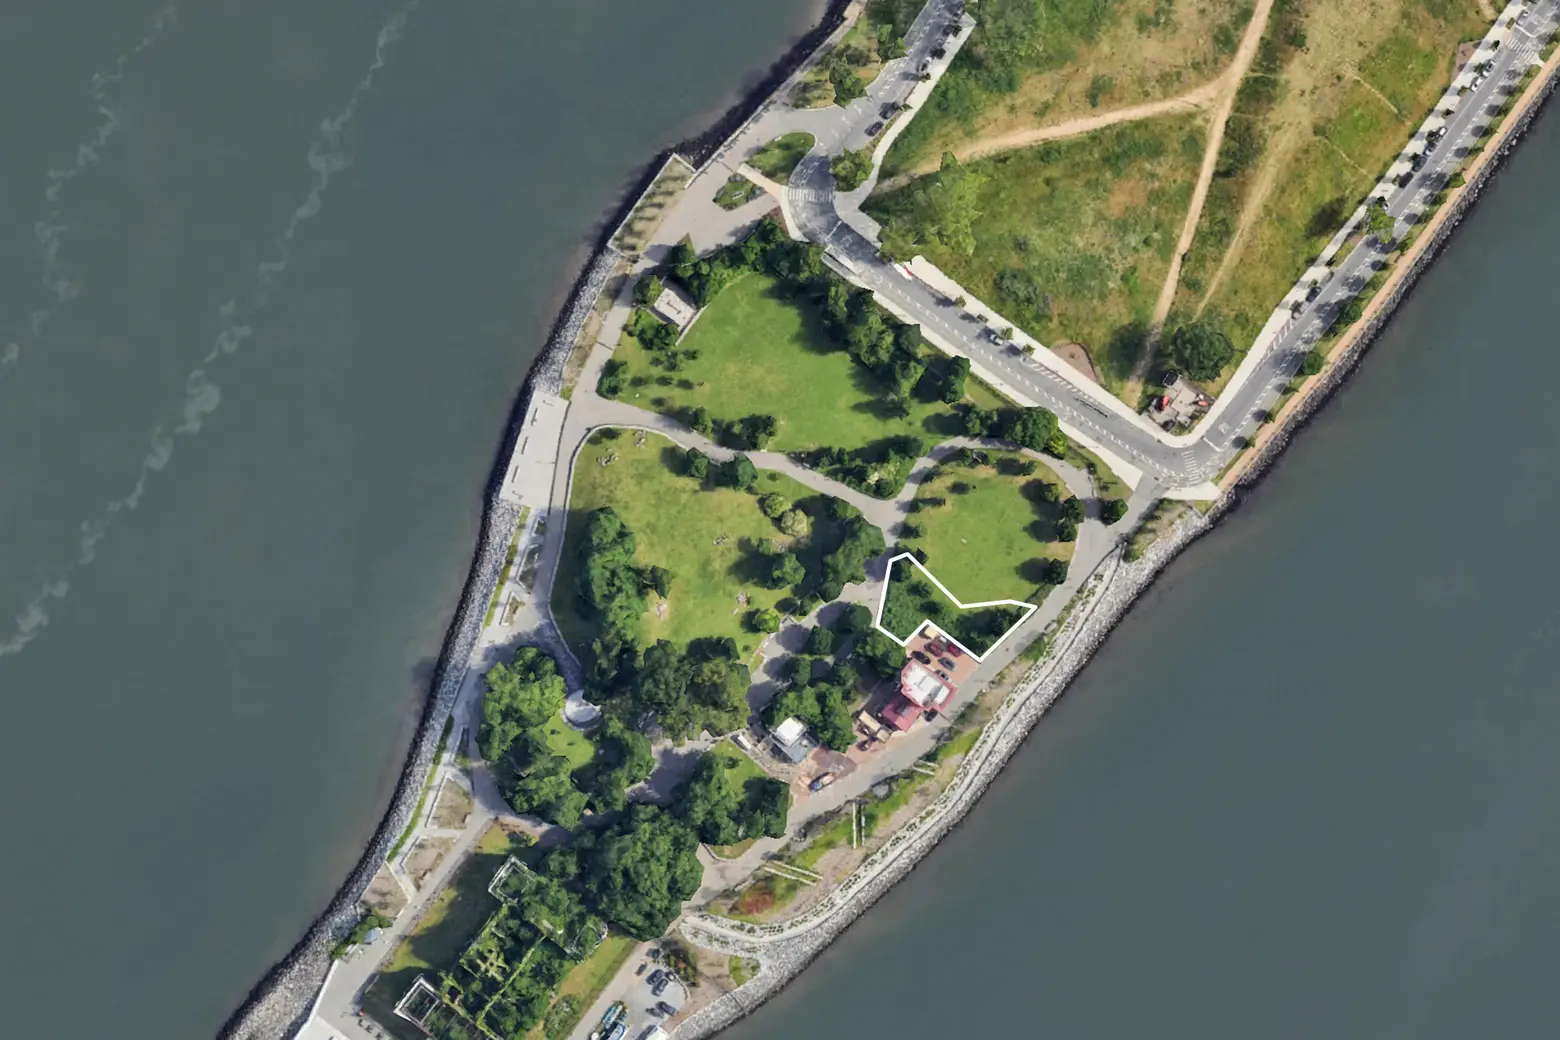 A mini forest is coming to Roosevelt Island